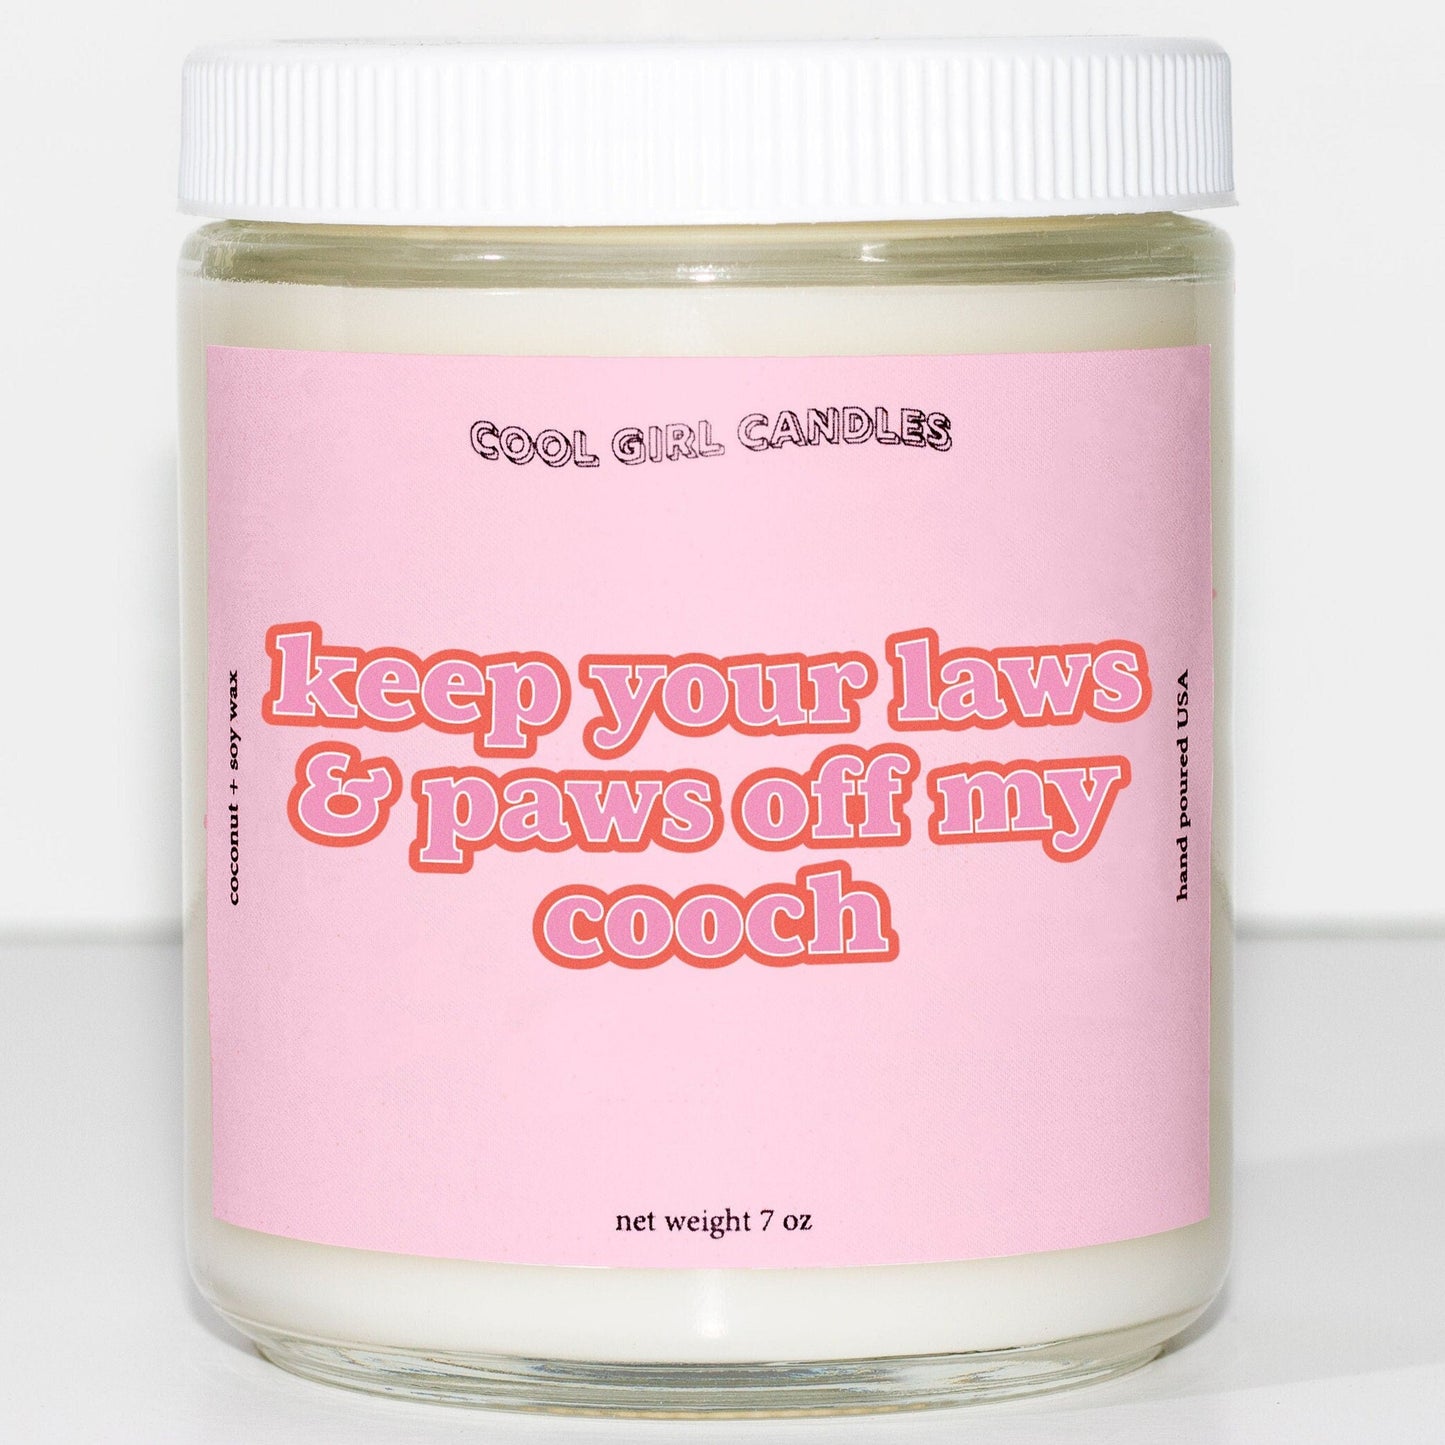 cool girl candles laws and paws candle pro-choice candle for planned parenthood